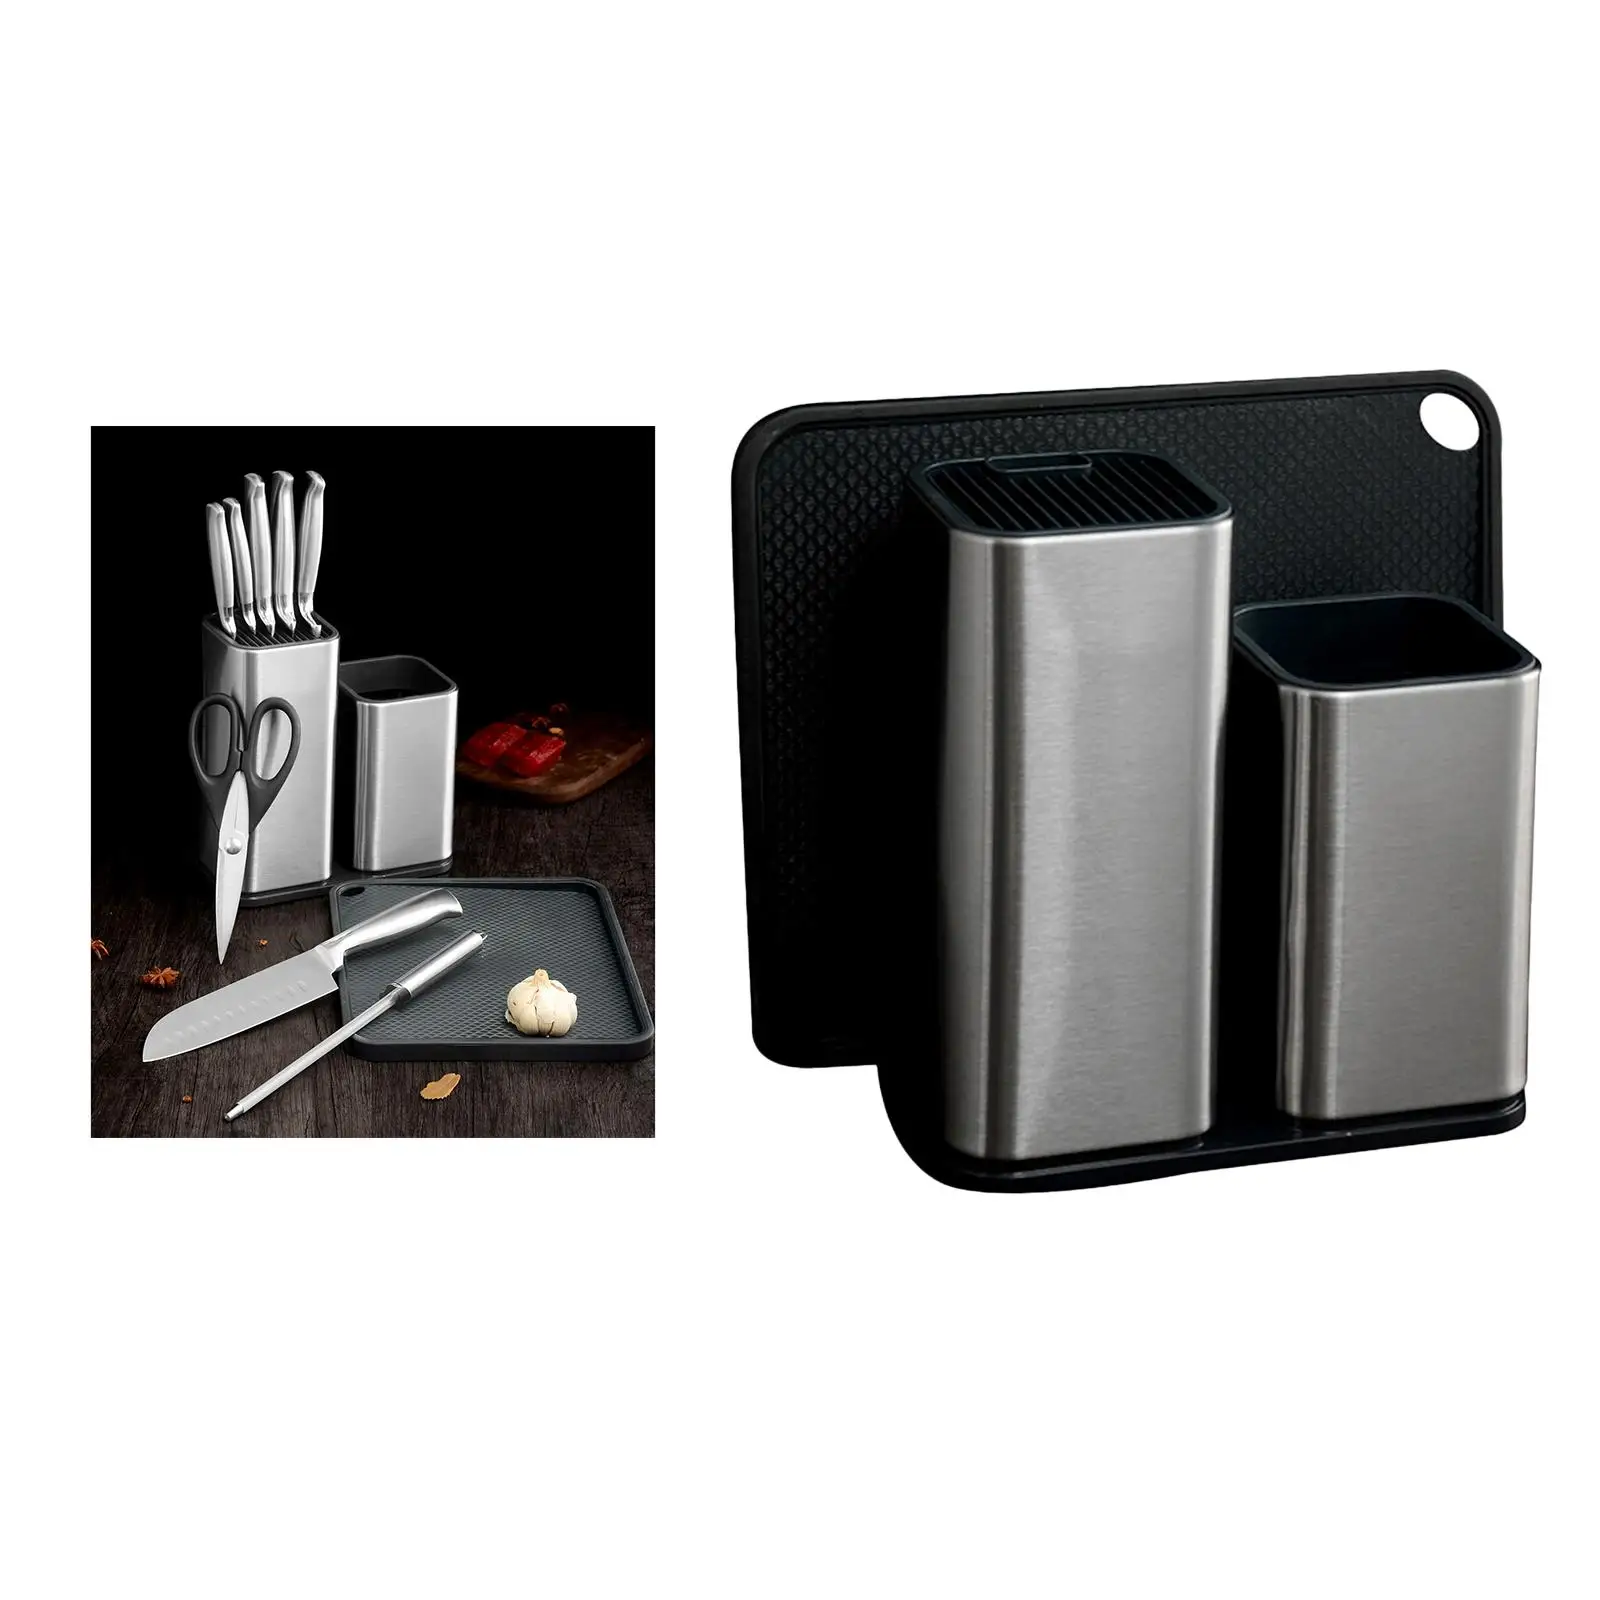 Stainless Steel Knife Block Holder Save Space Keep Tableware Cleaning Knife Organizer Slot Design